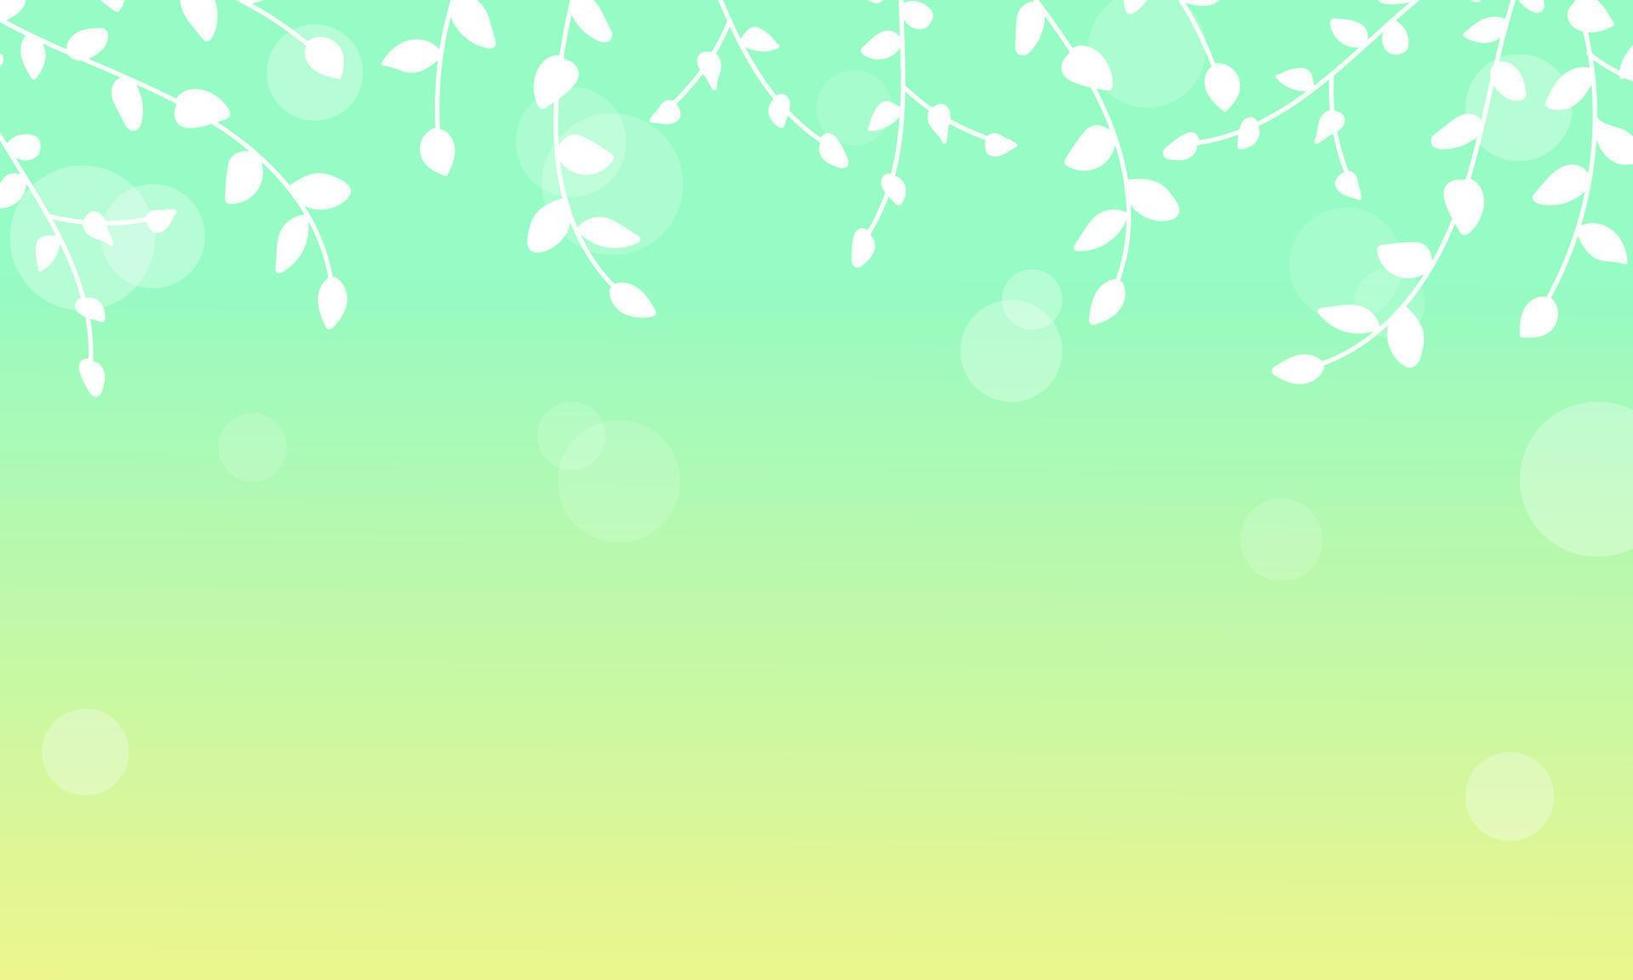 Abstract spring or summer background. Yellow and blue gradient background with branches and glares vector